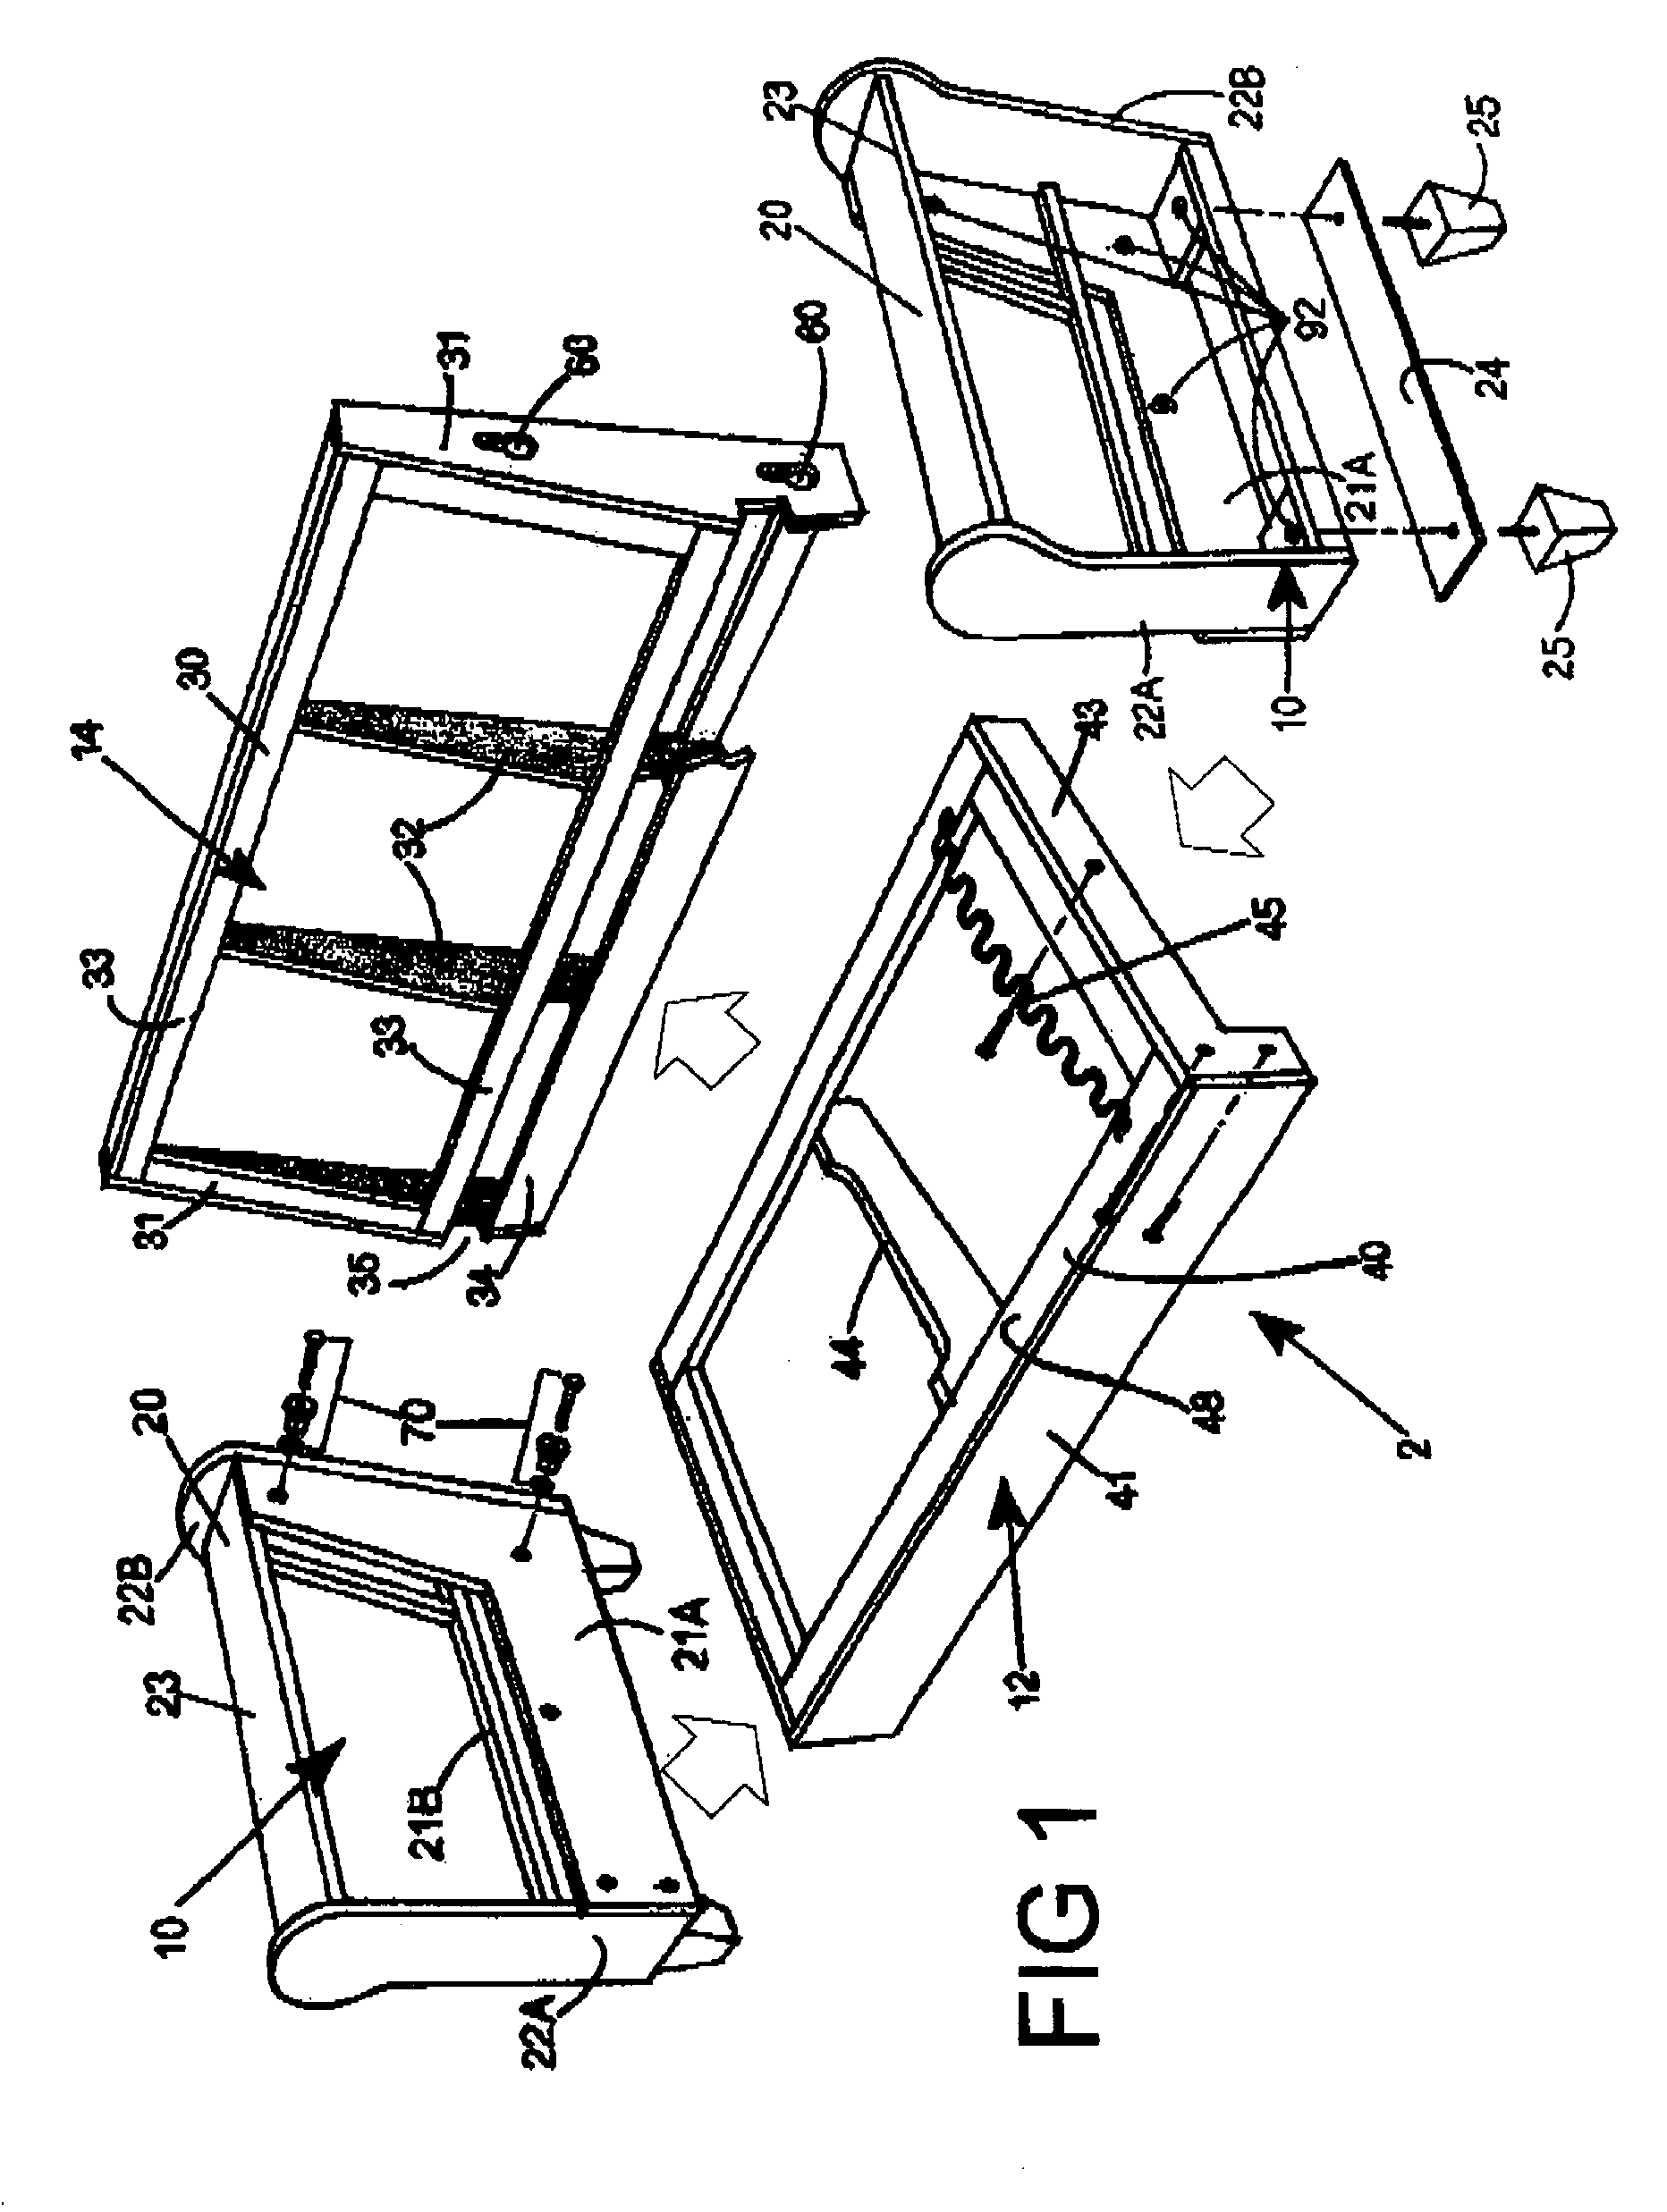 Assembly apparatus for modular components especially for upholstered furniture